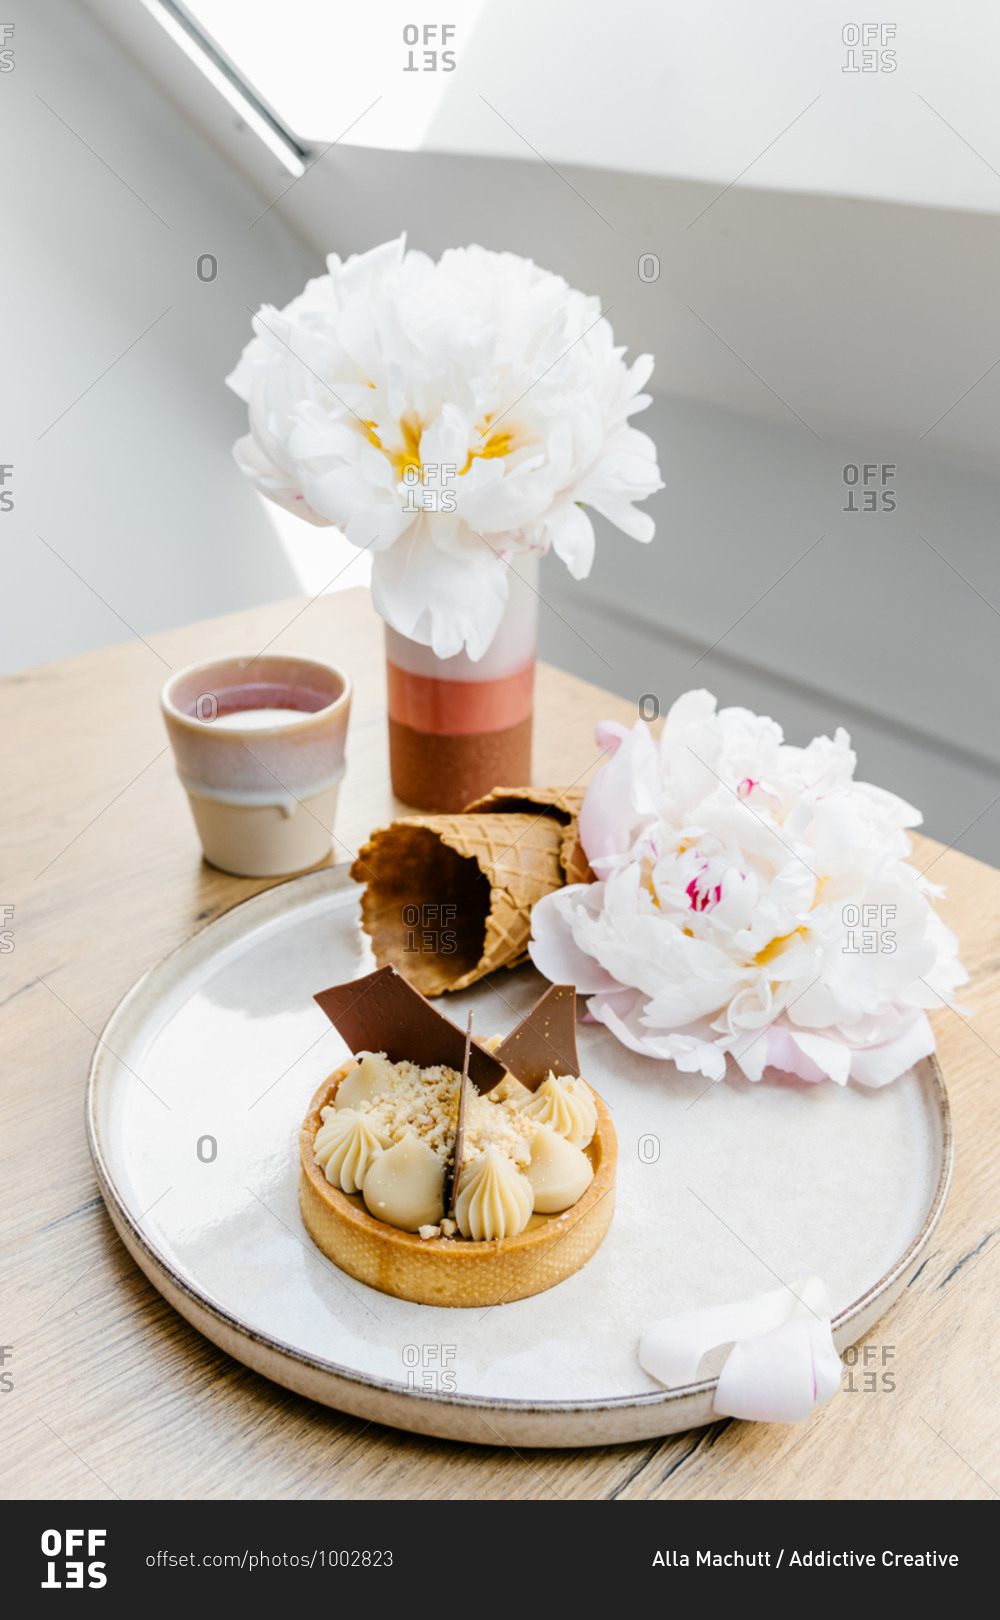 High angle of palatable caramel tart garnished with white and milk chocolate and placed on tray with waffle cones and peony flowers